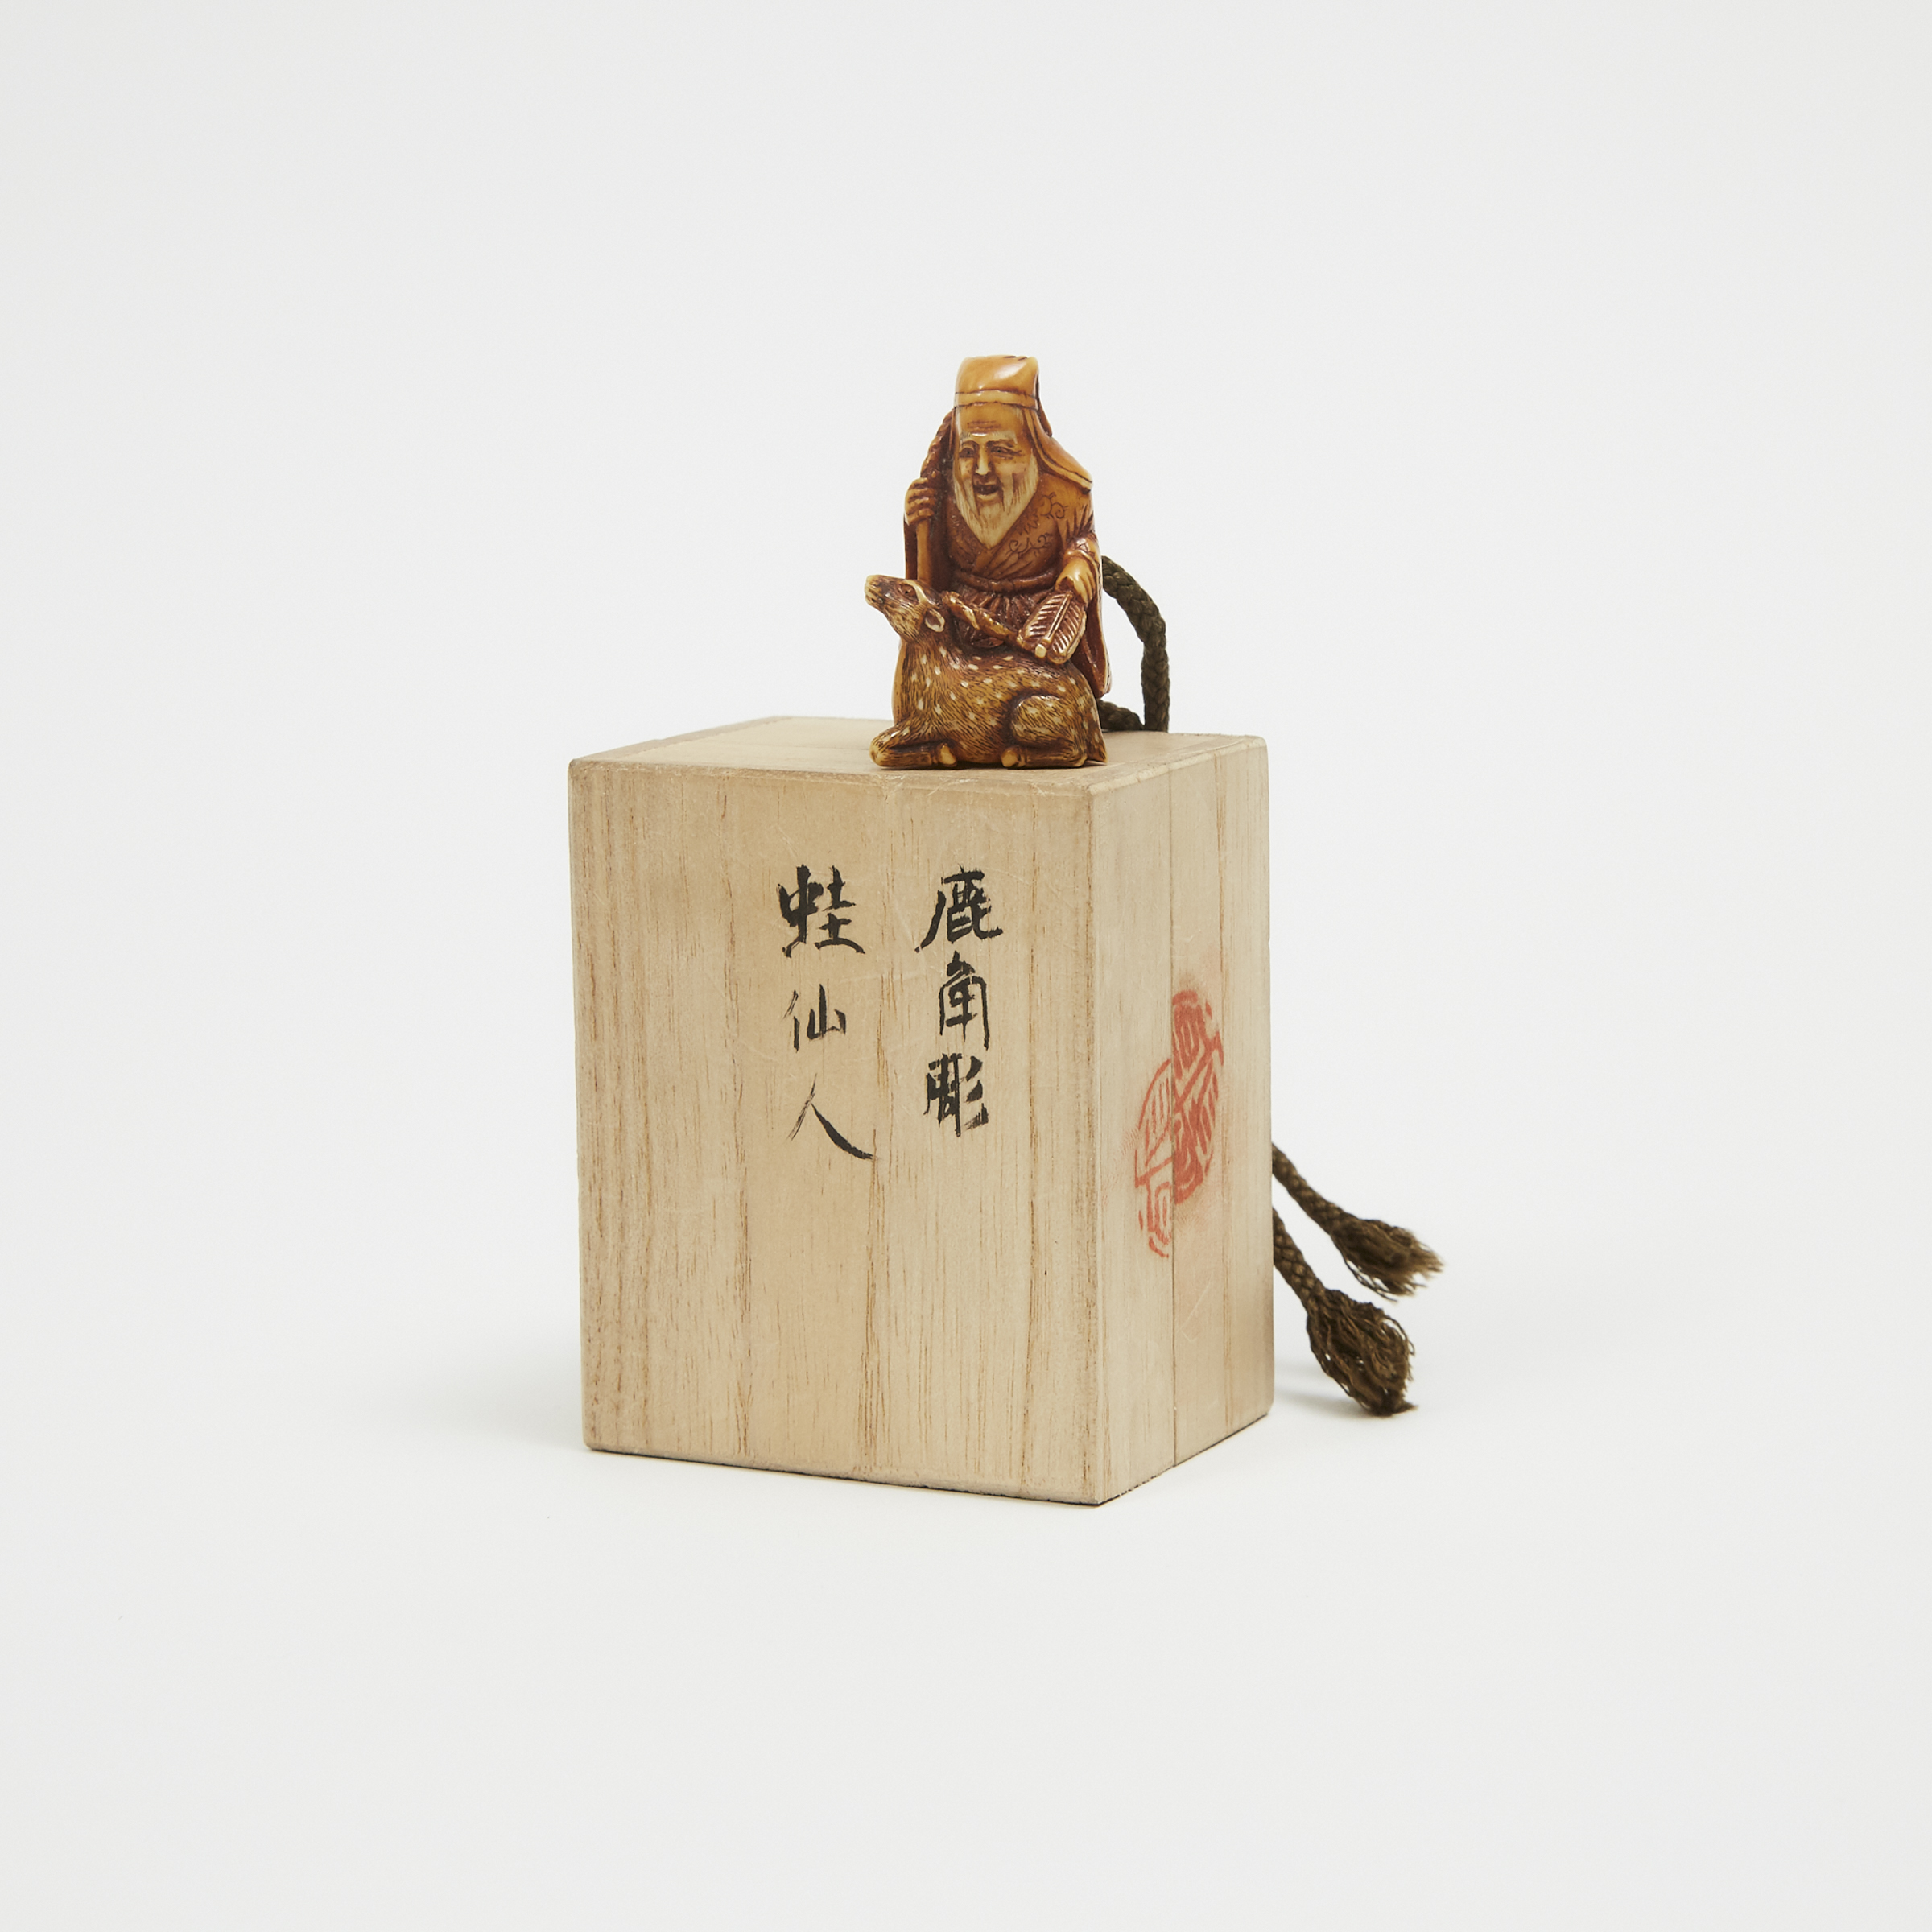 An Ivory Netsuke of an Old Man and Deer, with Signed Box